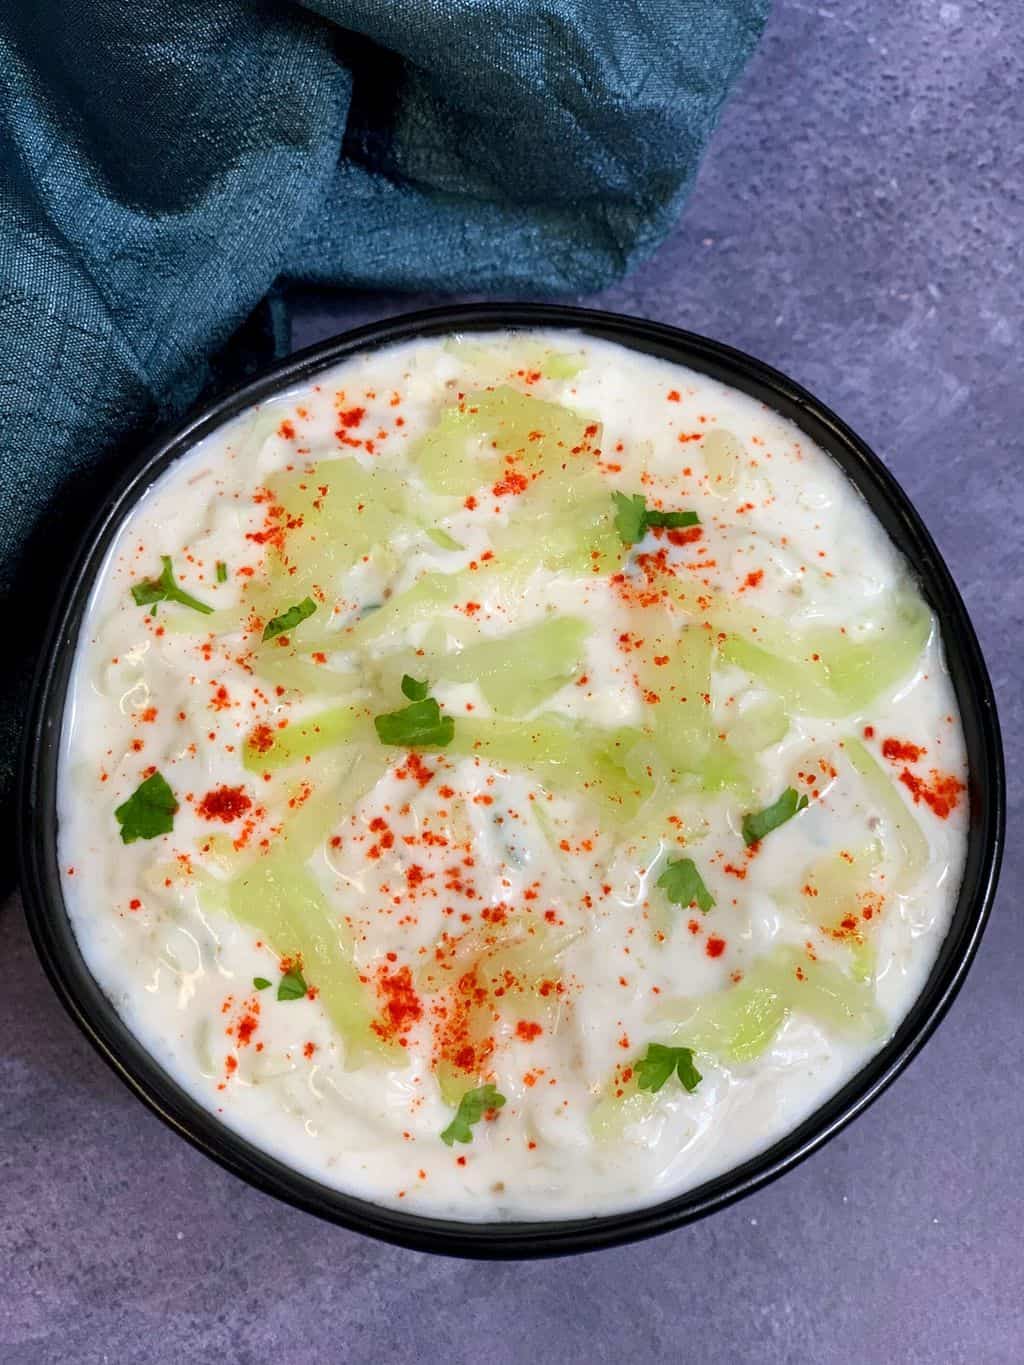 lauki raita served in a bowl garnished with chilli powder coriander and cooked bottle gourd